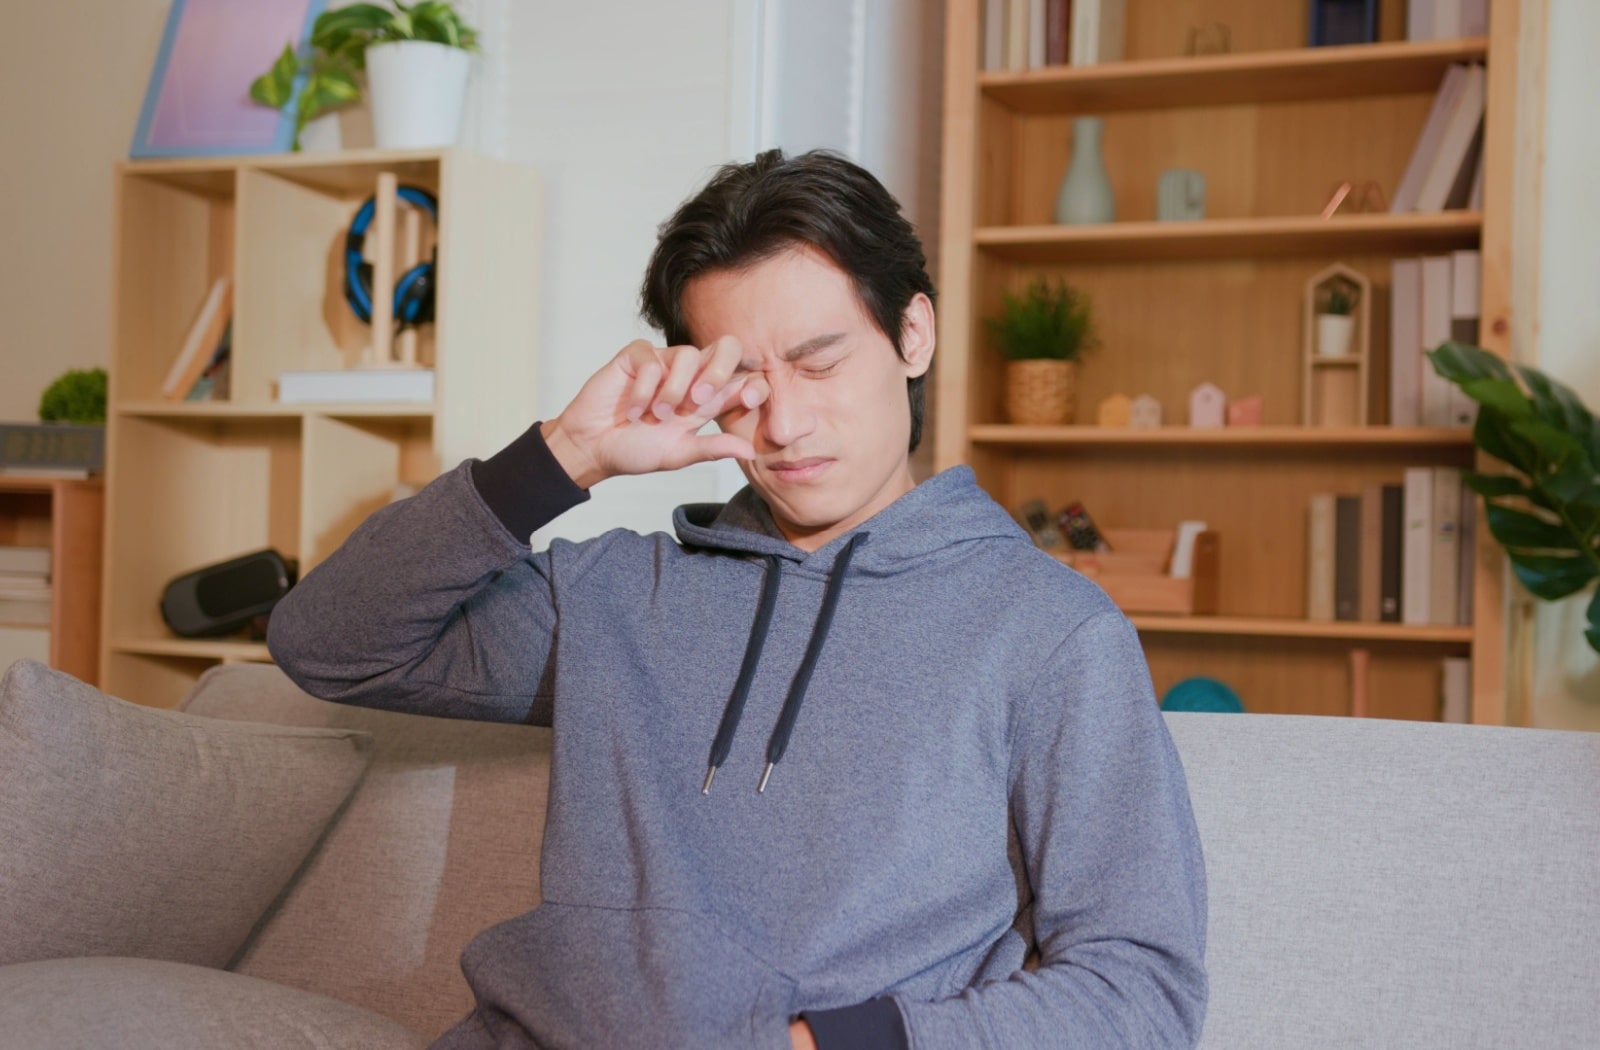 A man in a hoodie rubbing his eyes due to eye dryness.